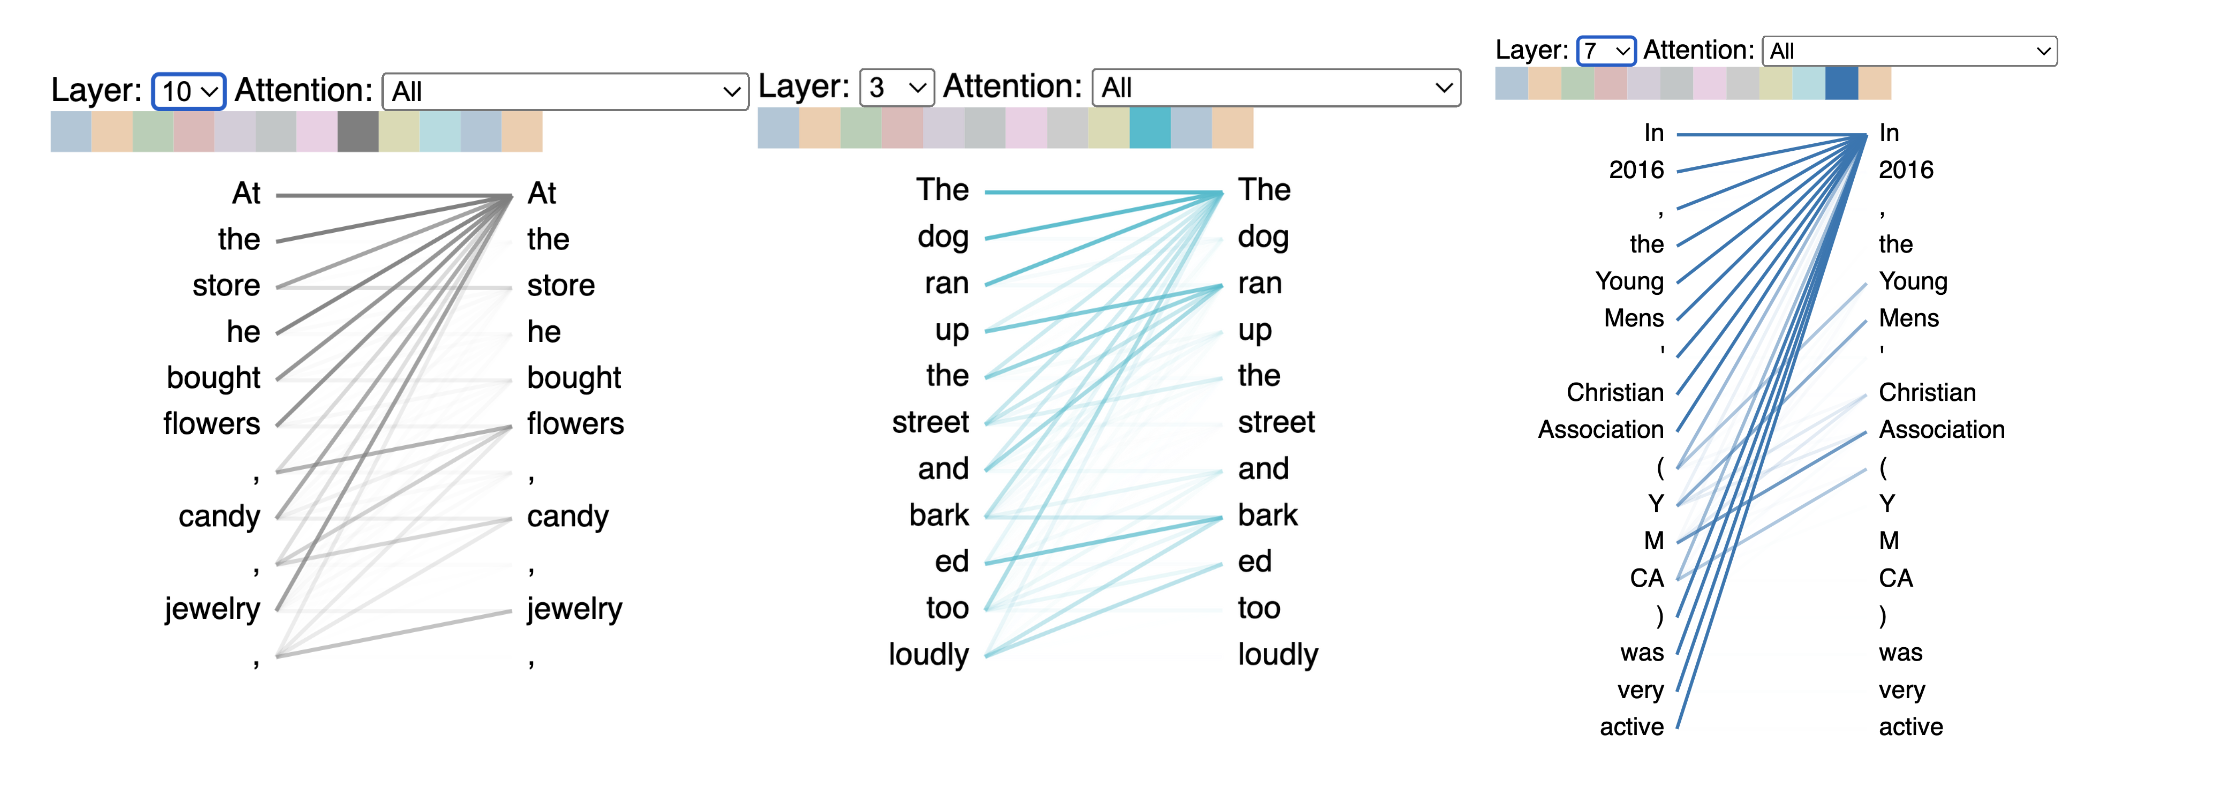 BertViz shows transformer attention heads capture lexical patterns like list items, verbs, and acronyms. 